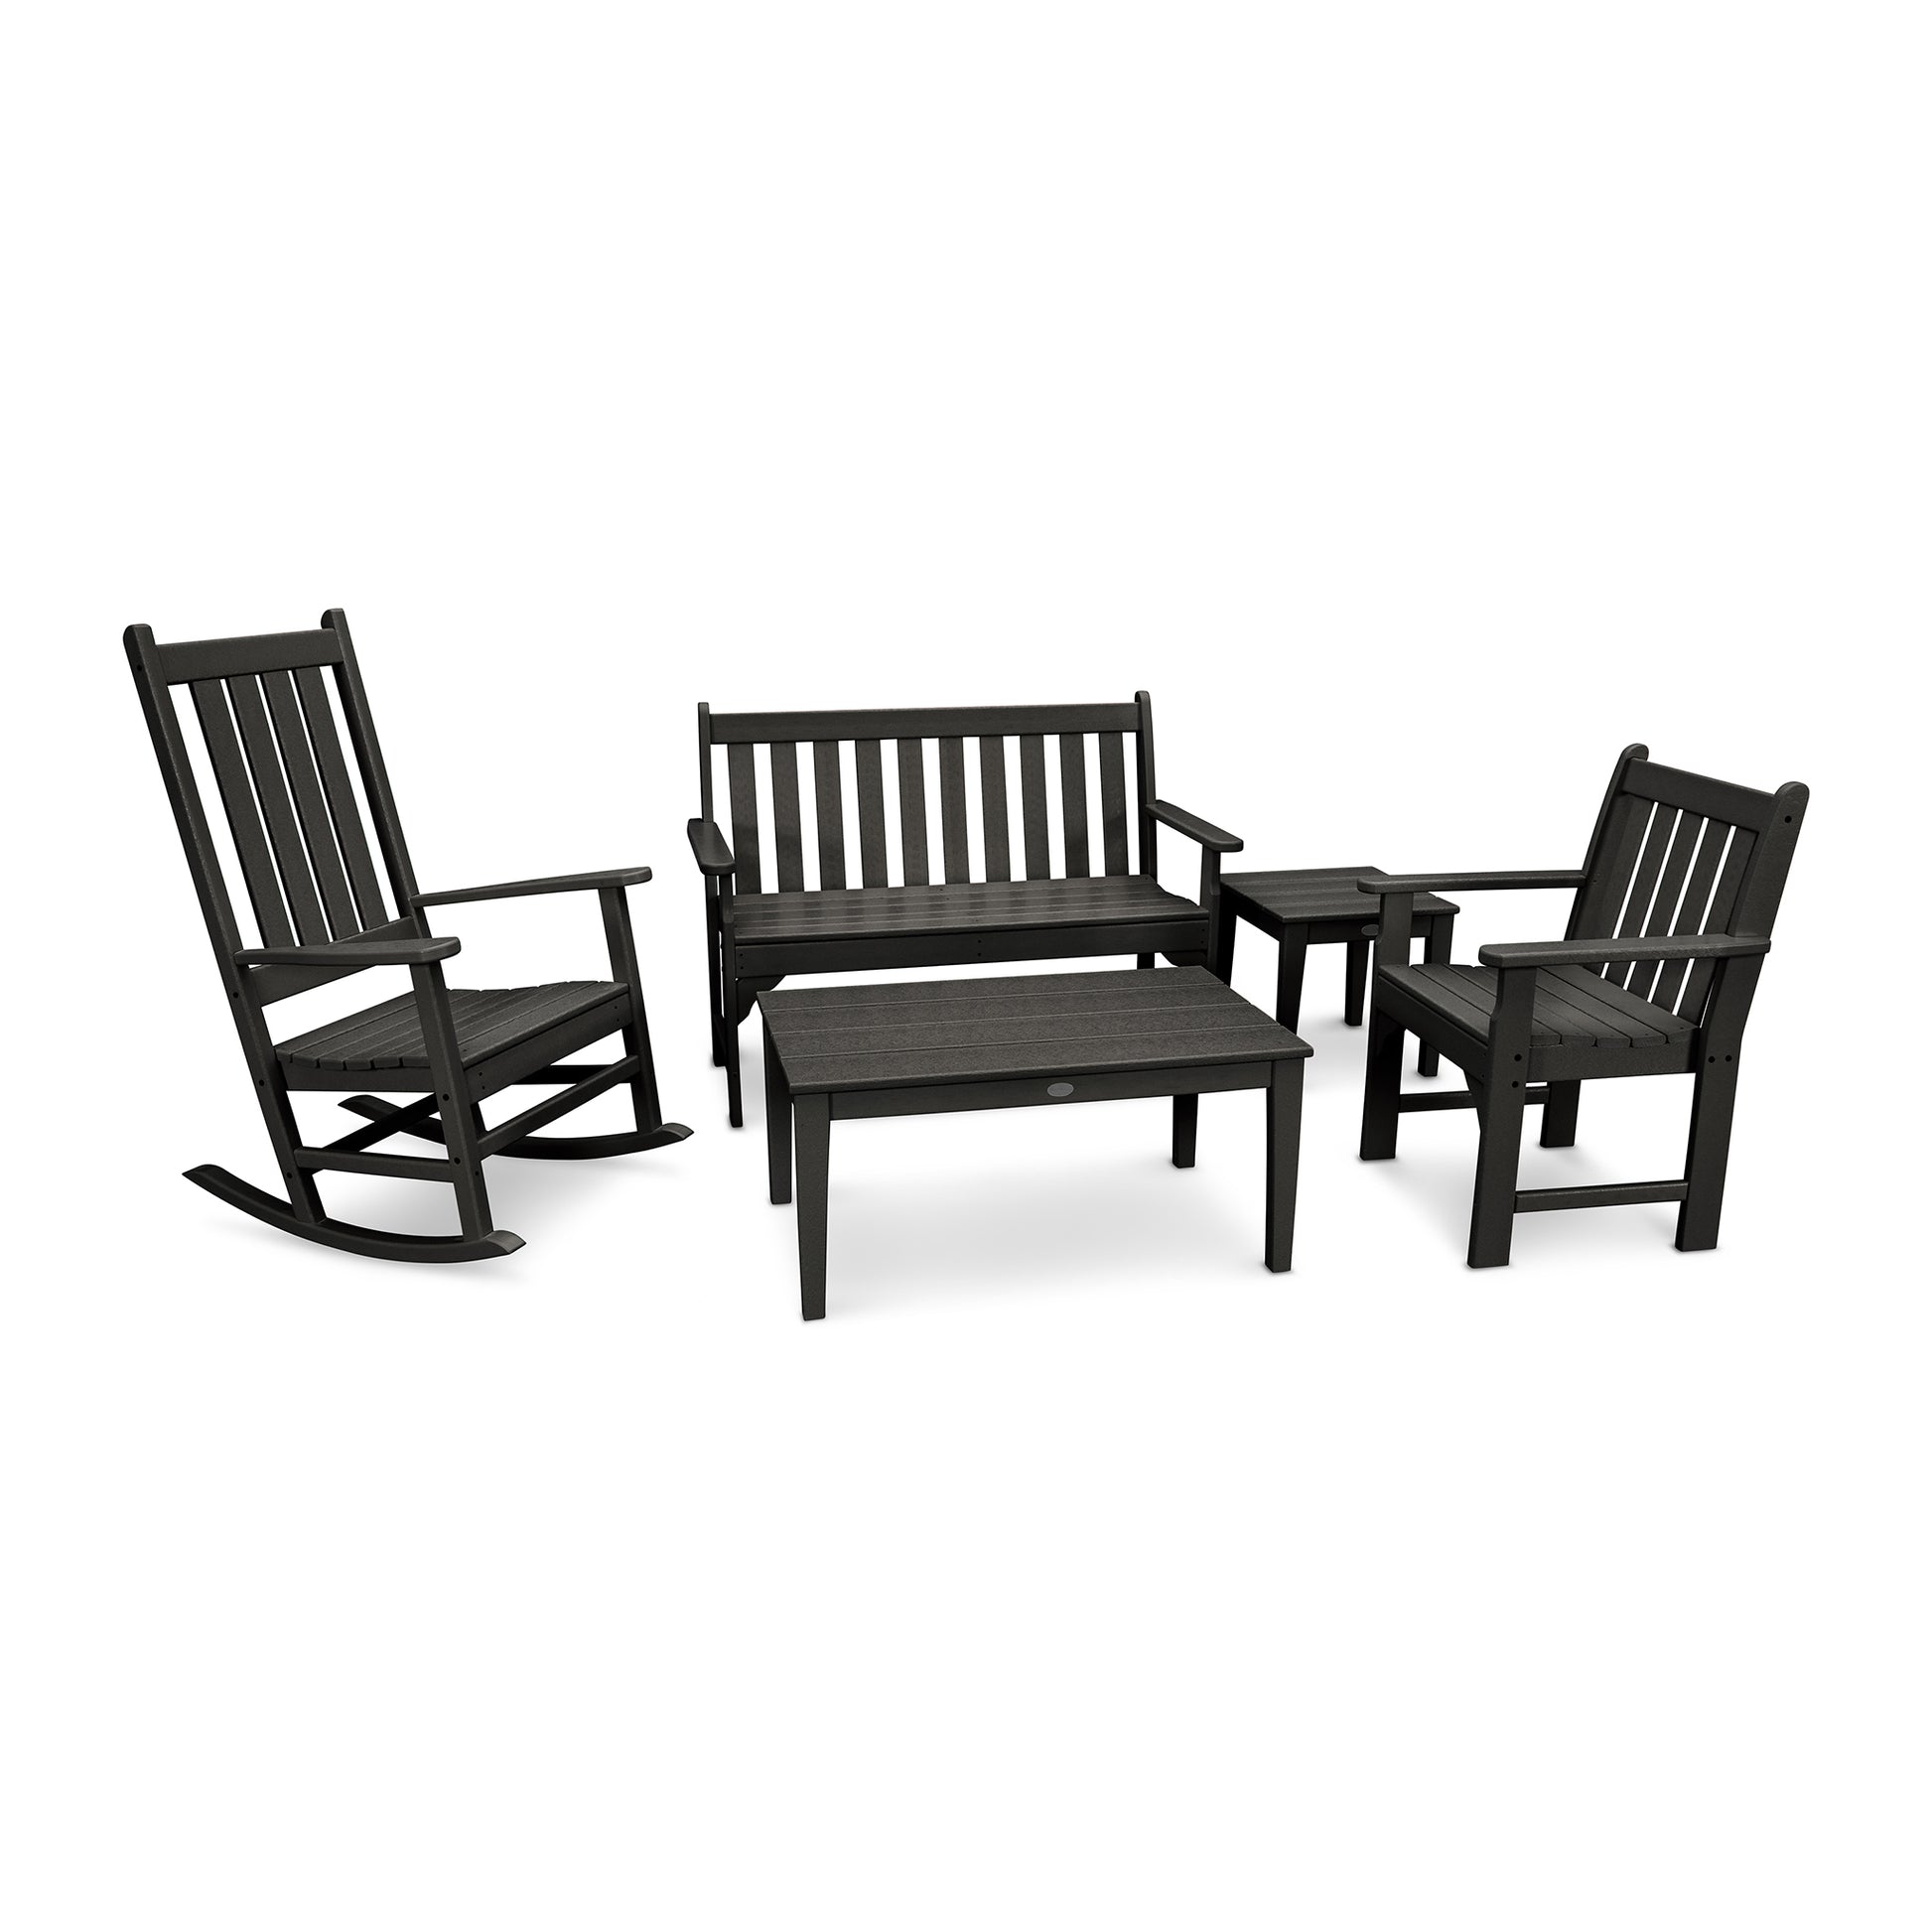 A set of black POLYWOOD Vineyard 5-Piece Bench & Rocking Chair Outdoor Furniture including two chairs, one rocking chair, a bench, and a small rectangular table, all displayed on a white background.